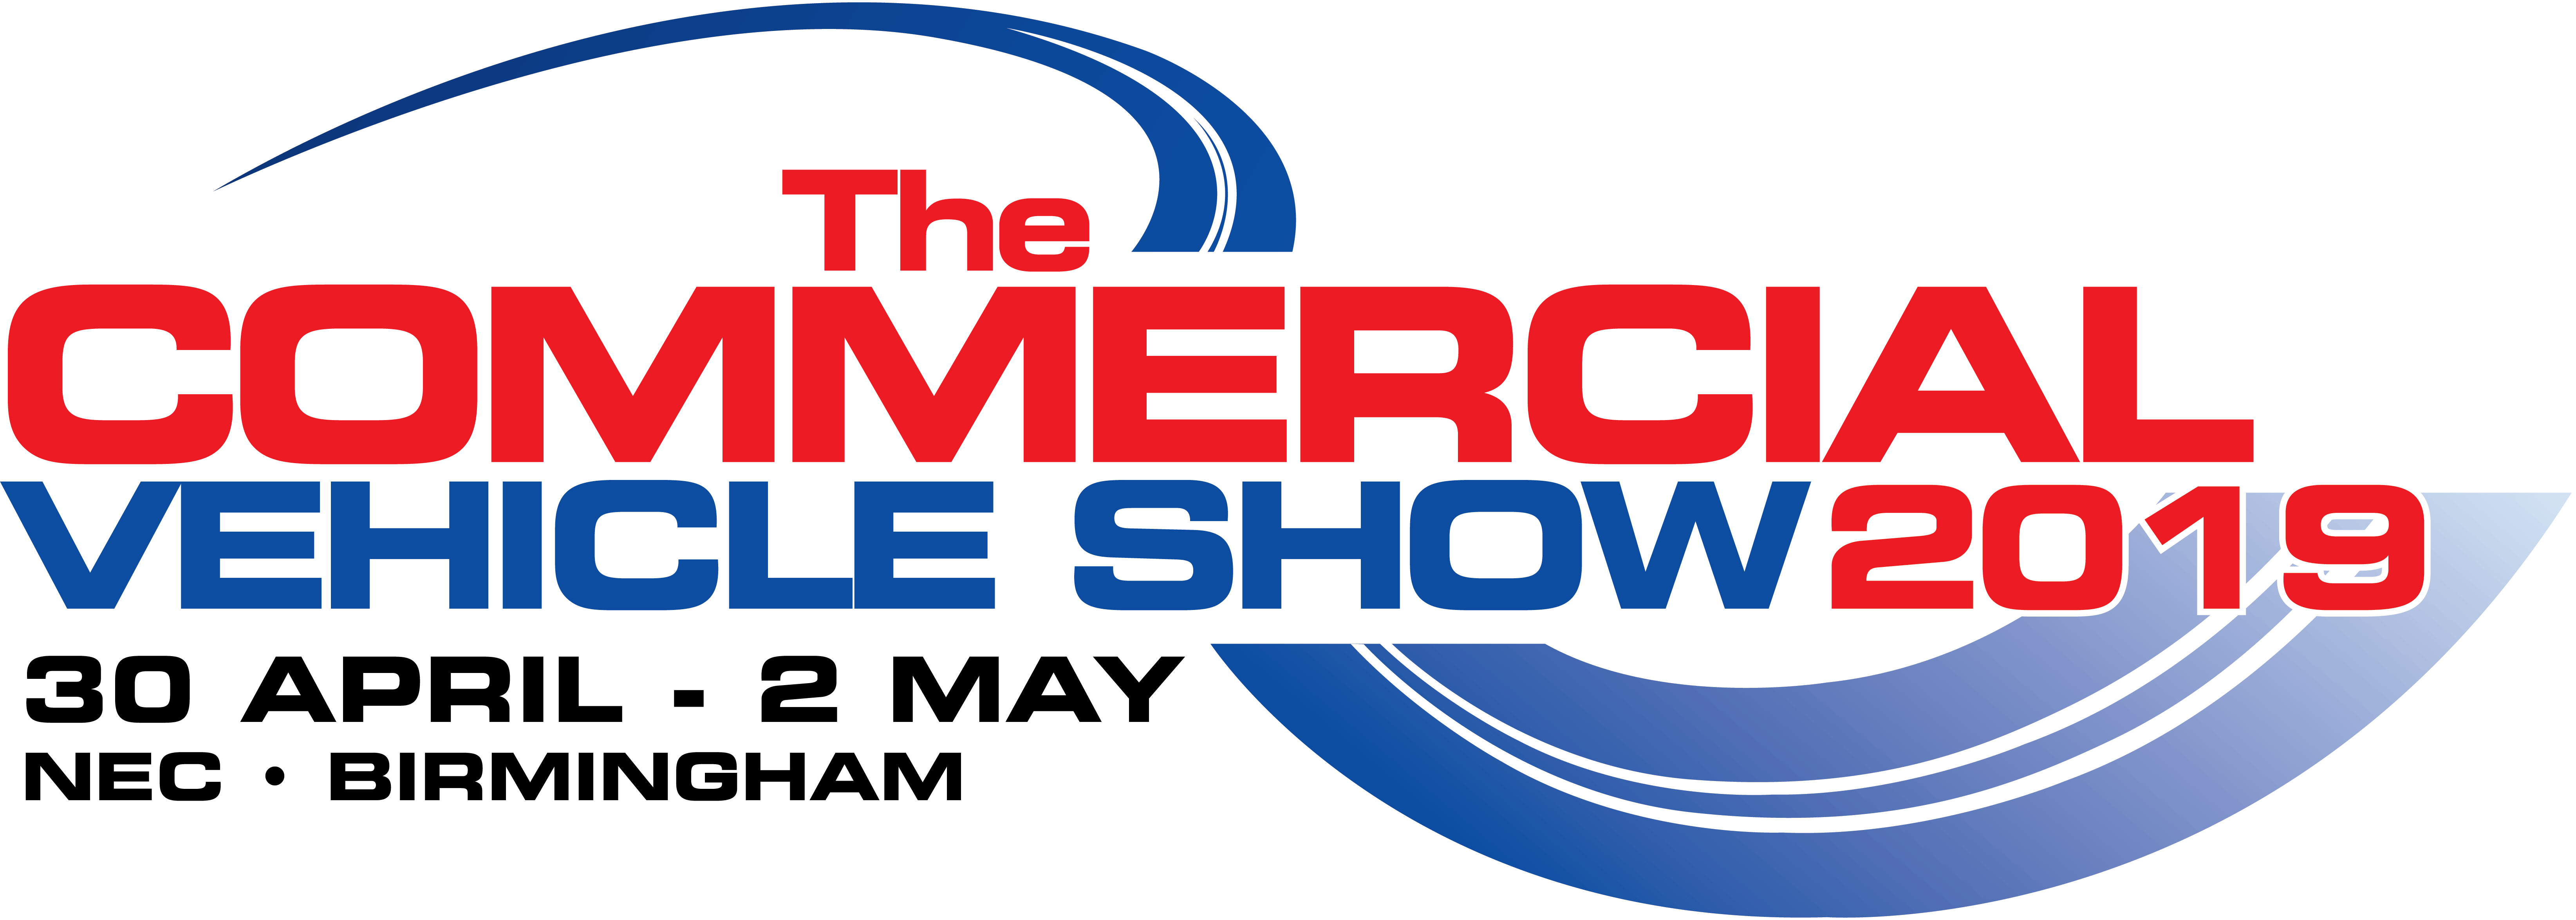 Red Oval Automotive Logo - Commercial Vehicle Show